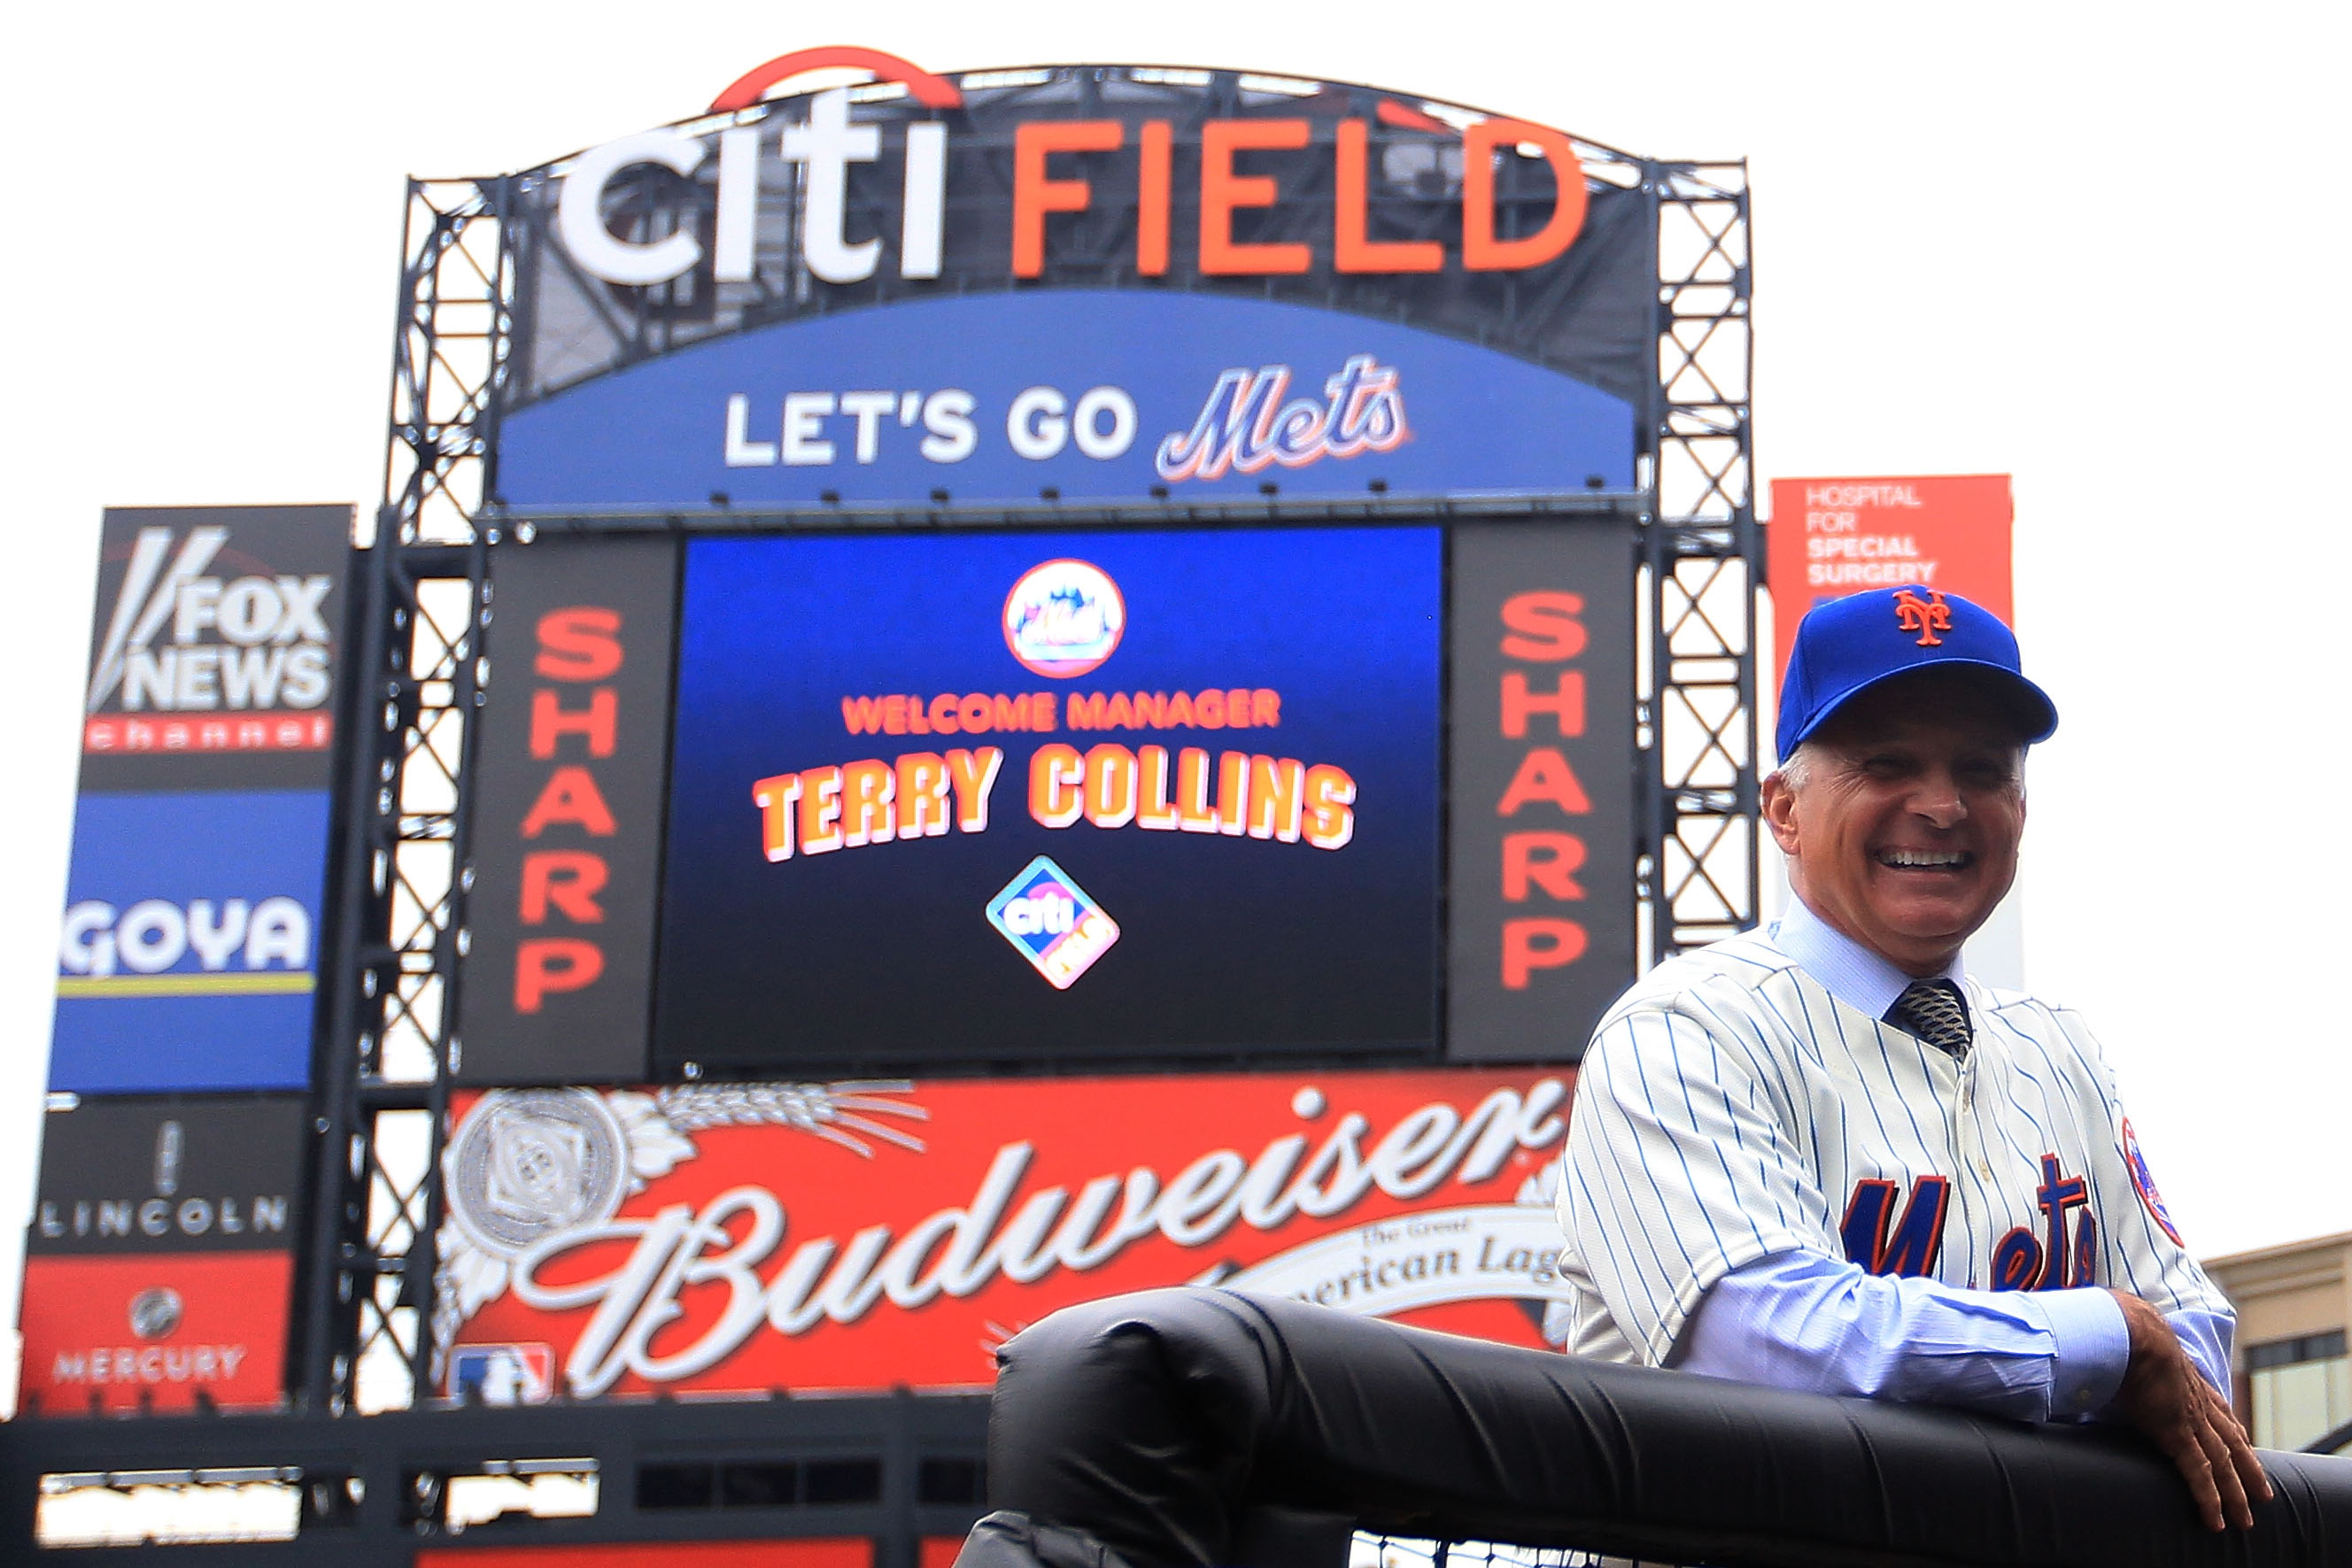 NEW YORK - NOVEMBER 23:  New York Mets new manager Terry Collins poses for photographs in the dugout after a press conference at Citi Field on November 23, 2010 in the Flushing neighborhood, of the Queens borough of New York City.  (Photo by Chris McGrath